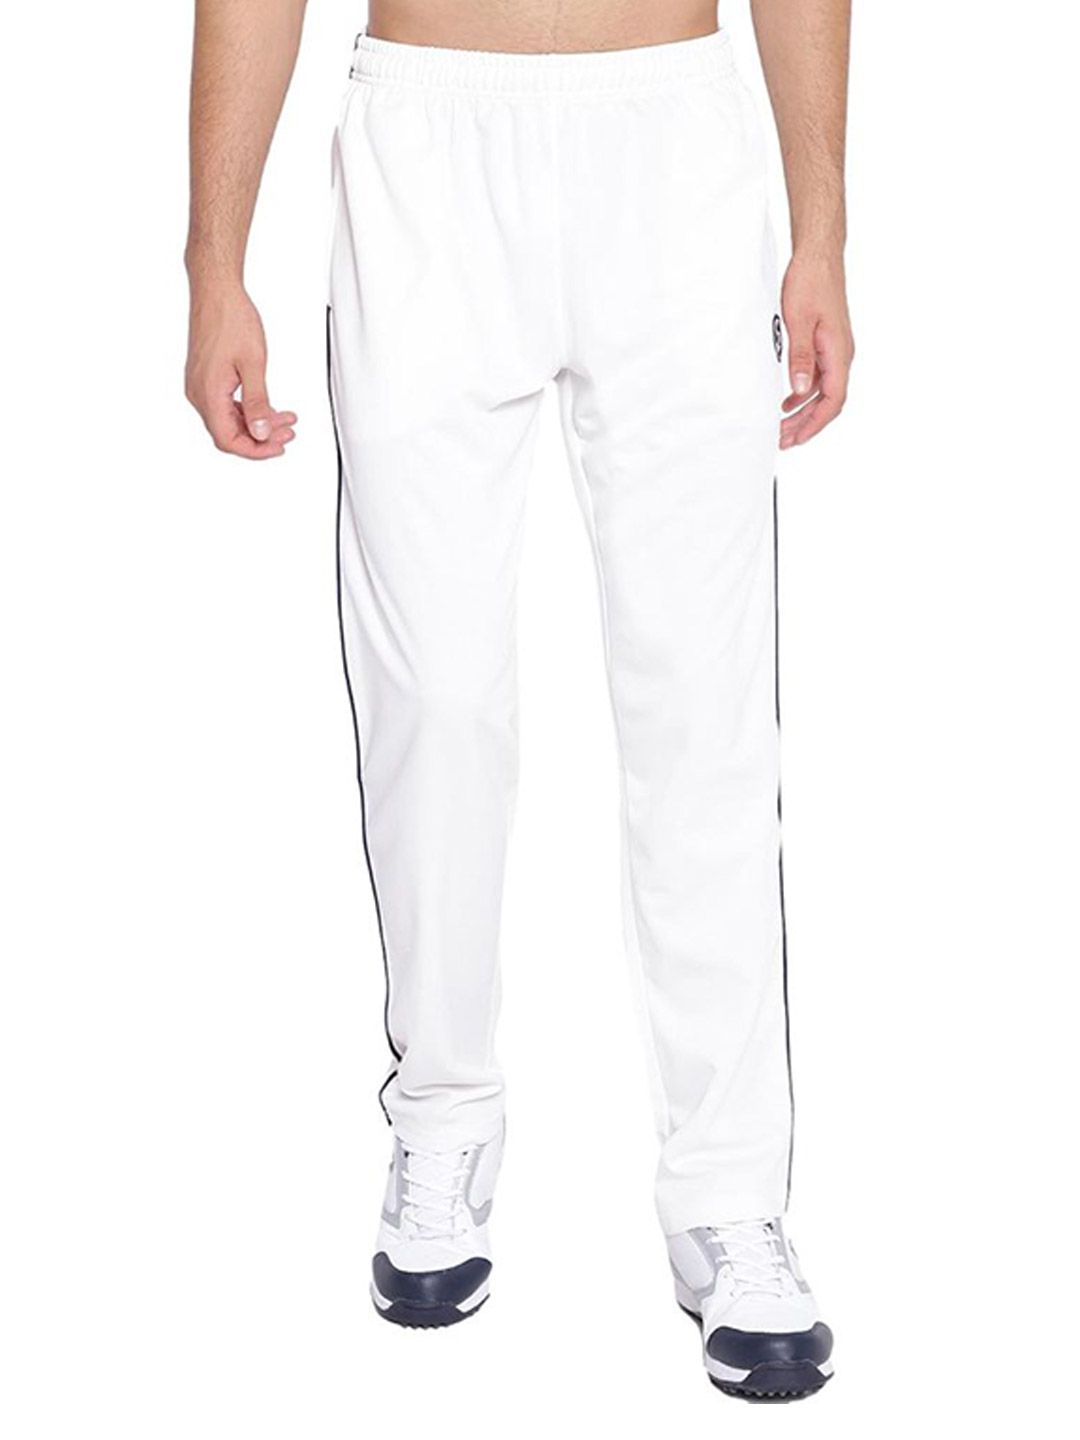 Buy Shrey White Premium Cricket TrouserPants Online in India at Best  Price Reviews